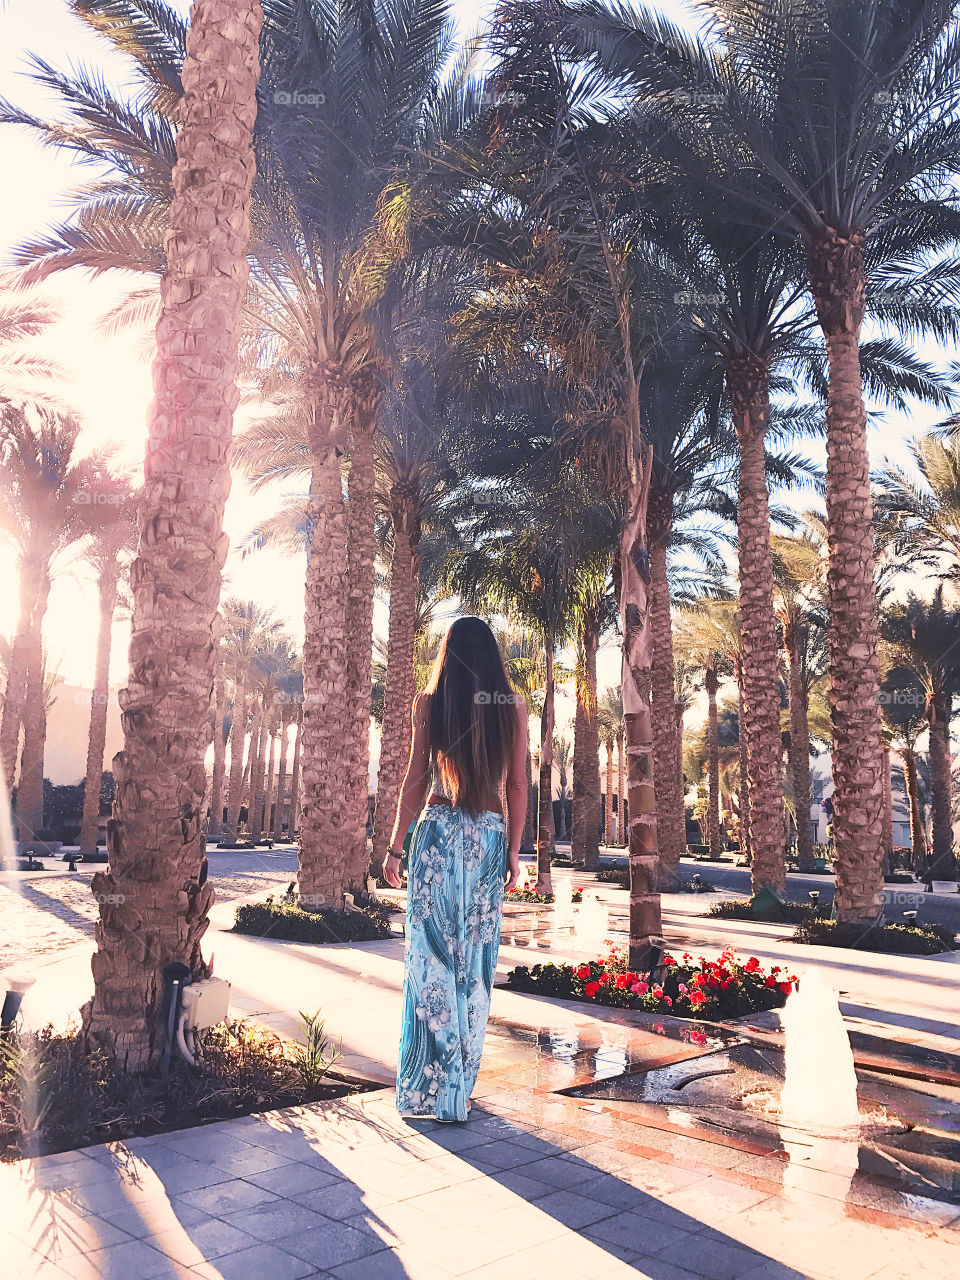 Young woman with long hair wearing a blue dress and walking through the tropical palm trees 